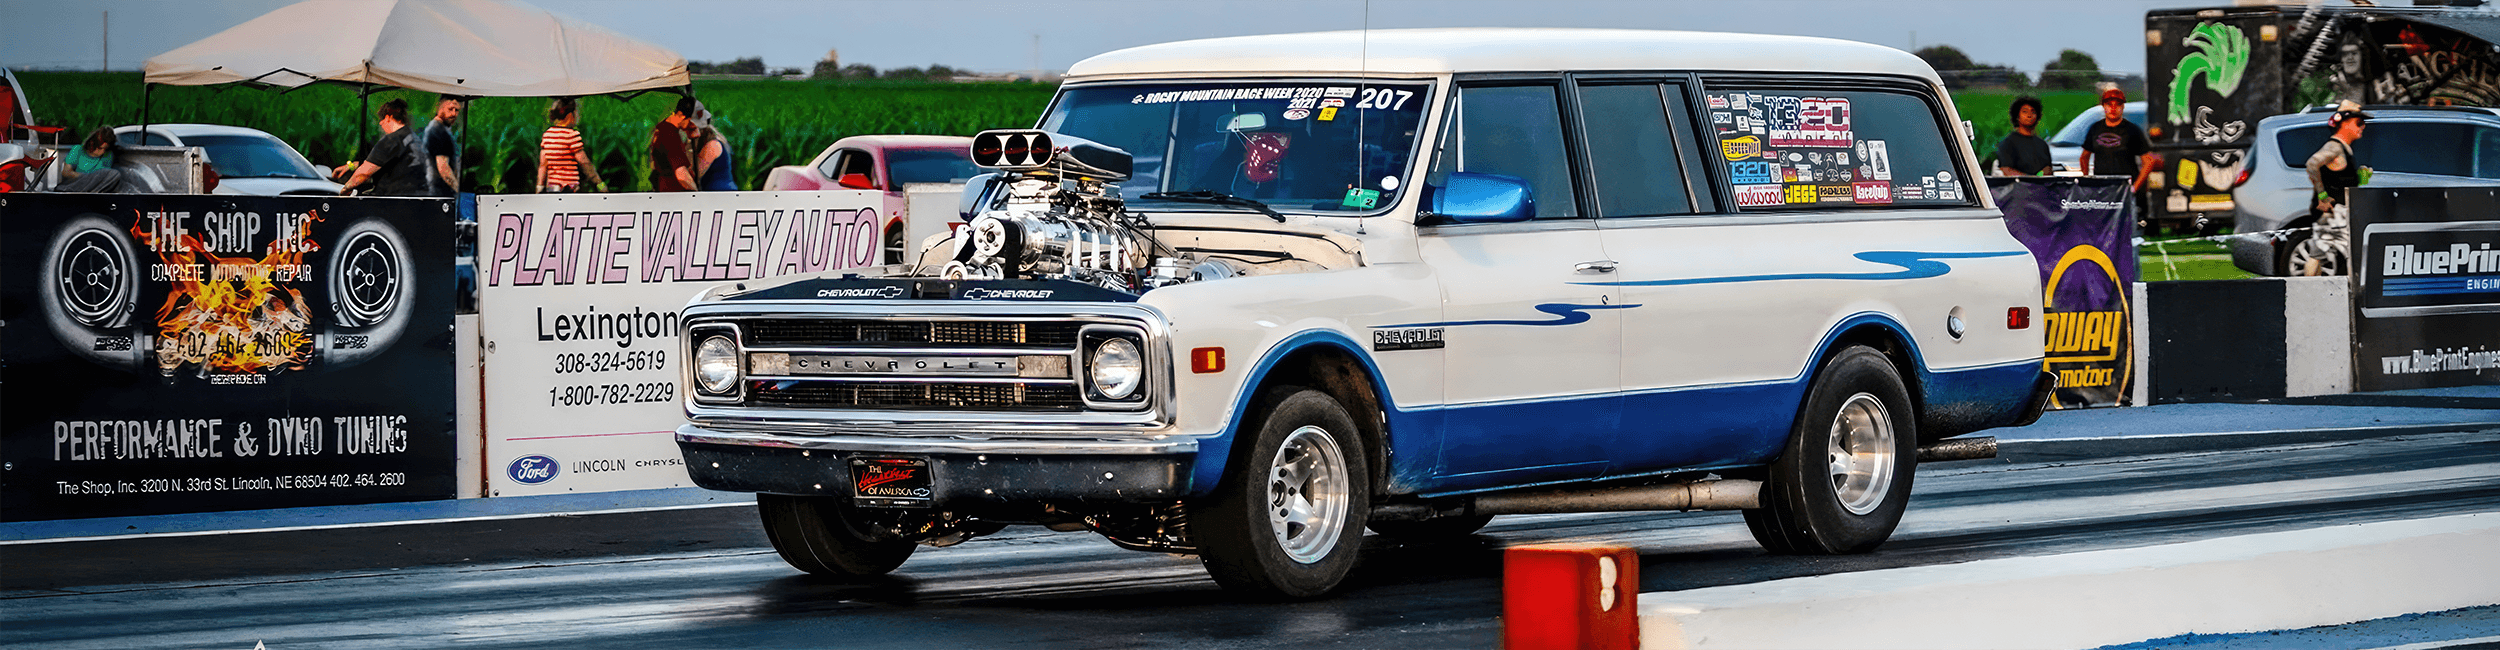 1970 Suburban powered by a BluePrint Engines' 540 c.i.